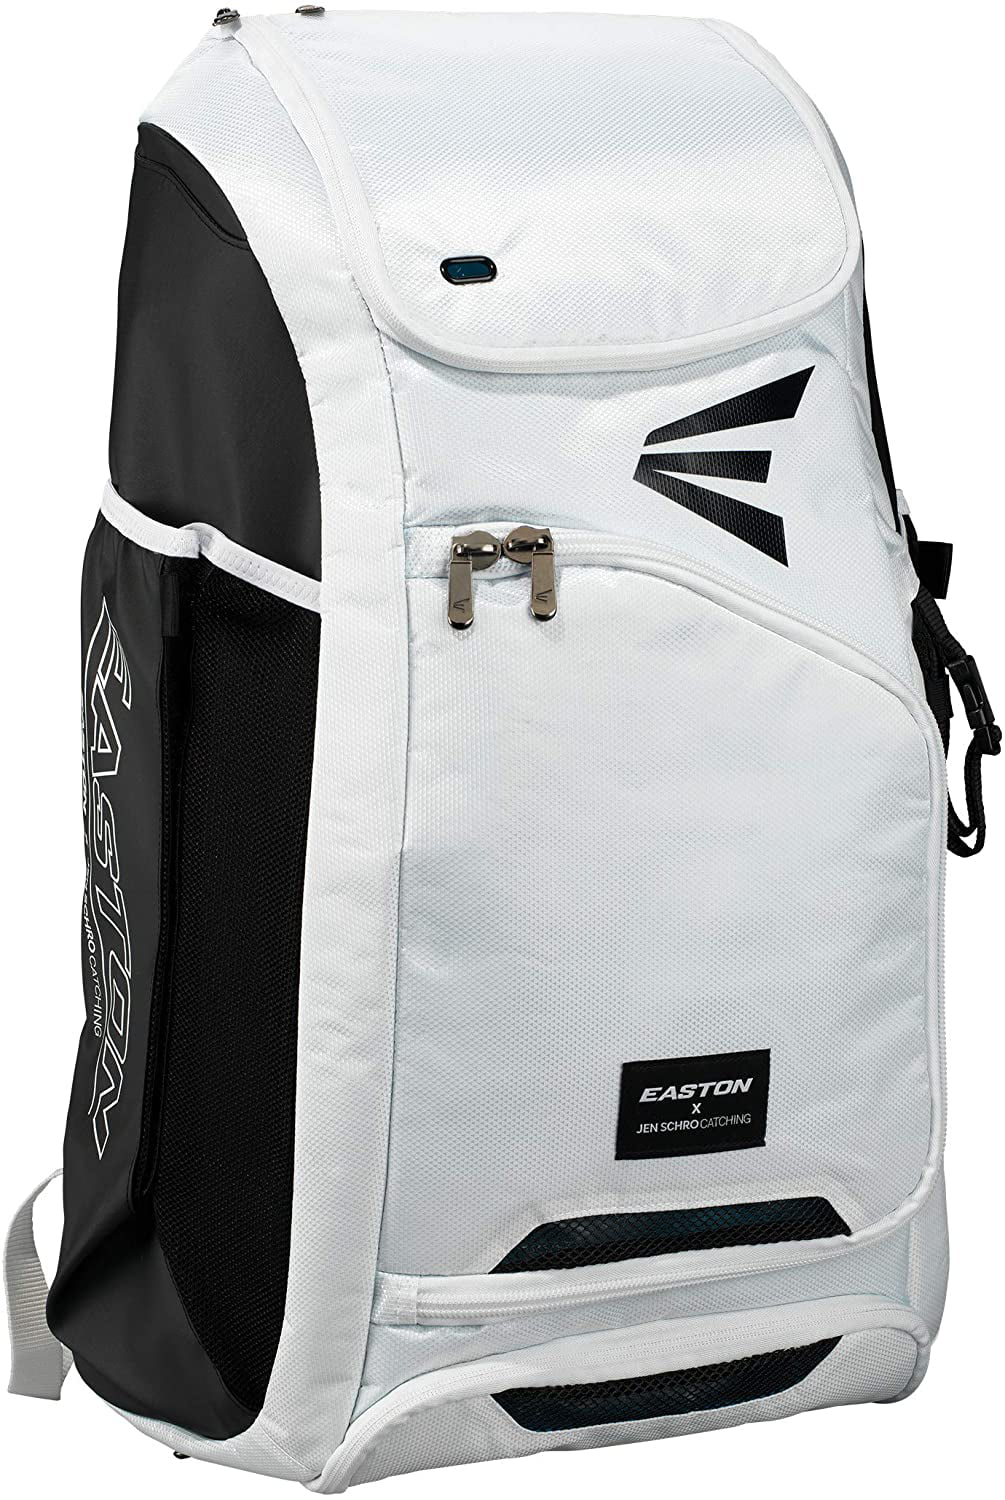 EASTON JEN SCHRO Edition Softball Catchers Bat and Equipment Backpack | |  White | Female Inspiration Lining | Vented Main Gear Compartment | Bats 